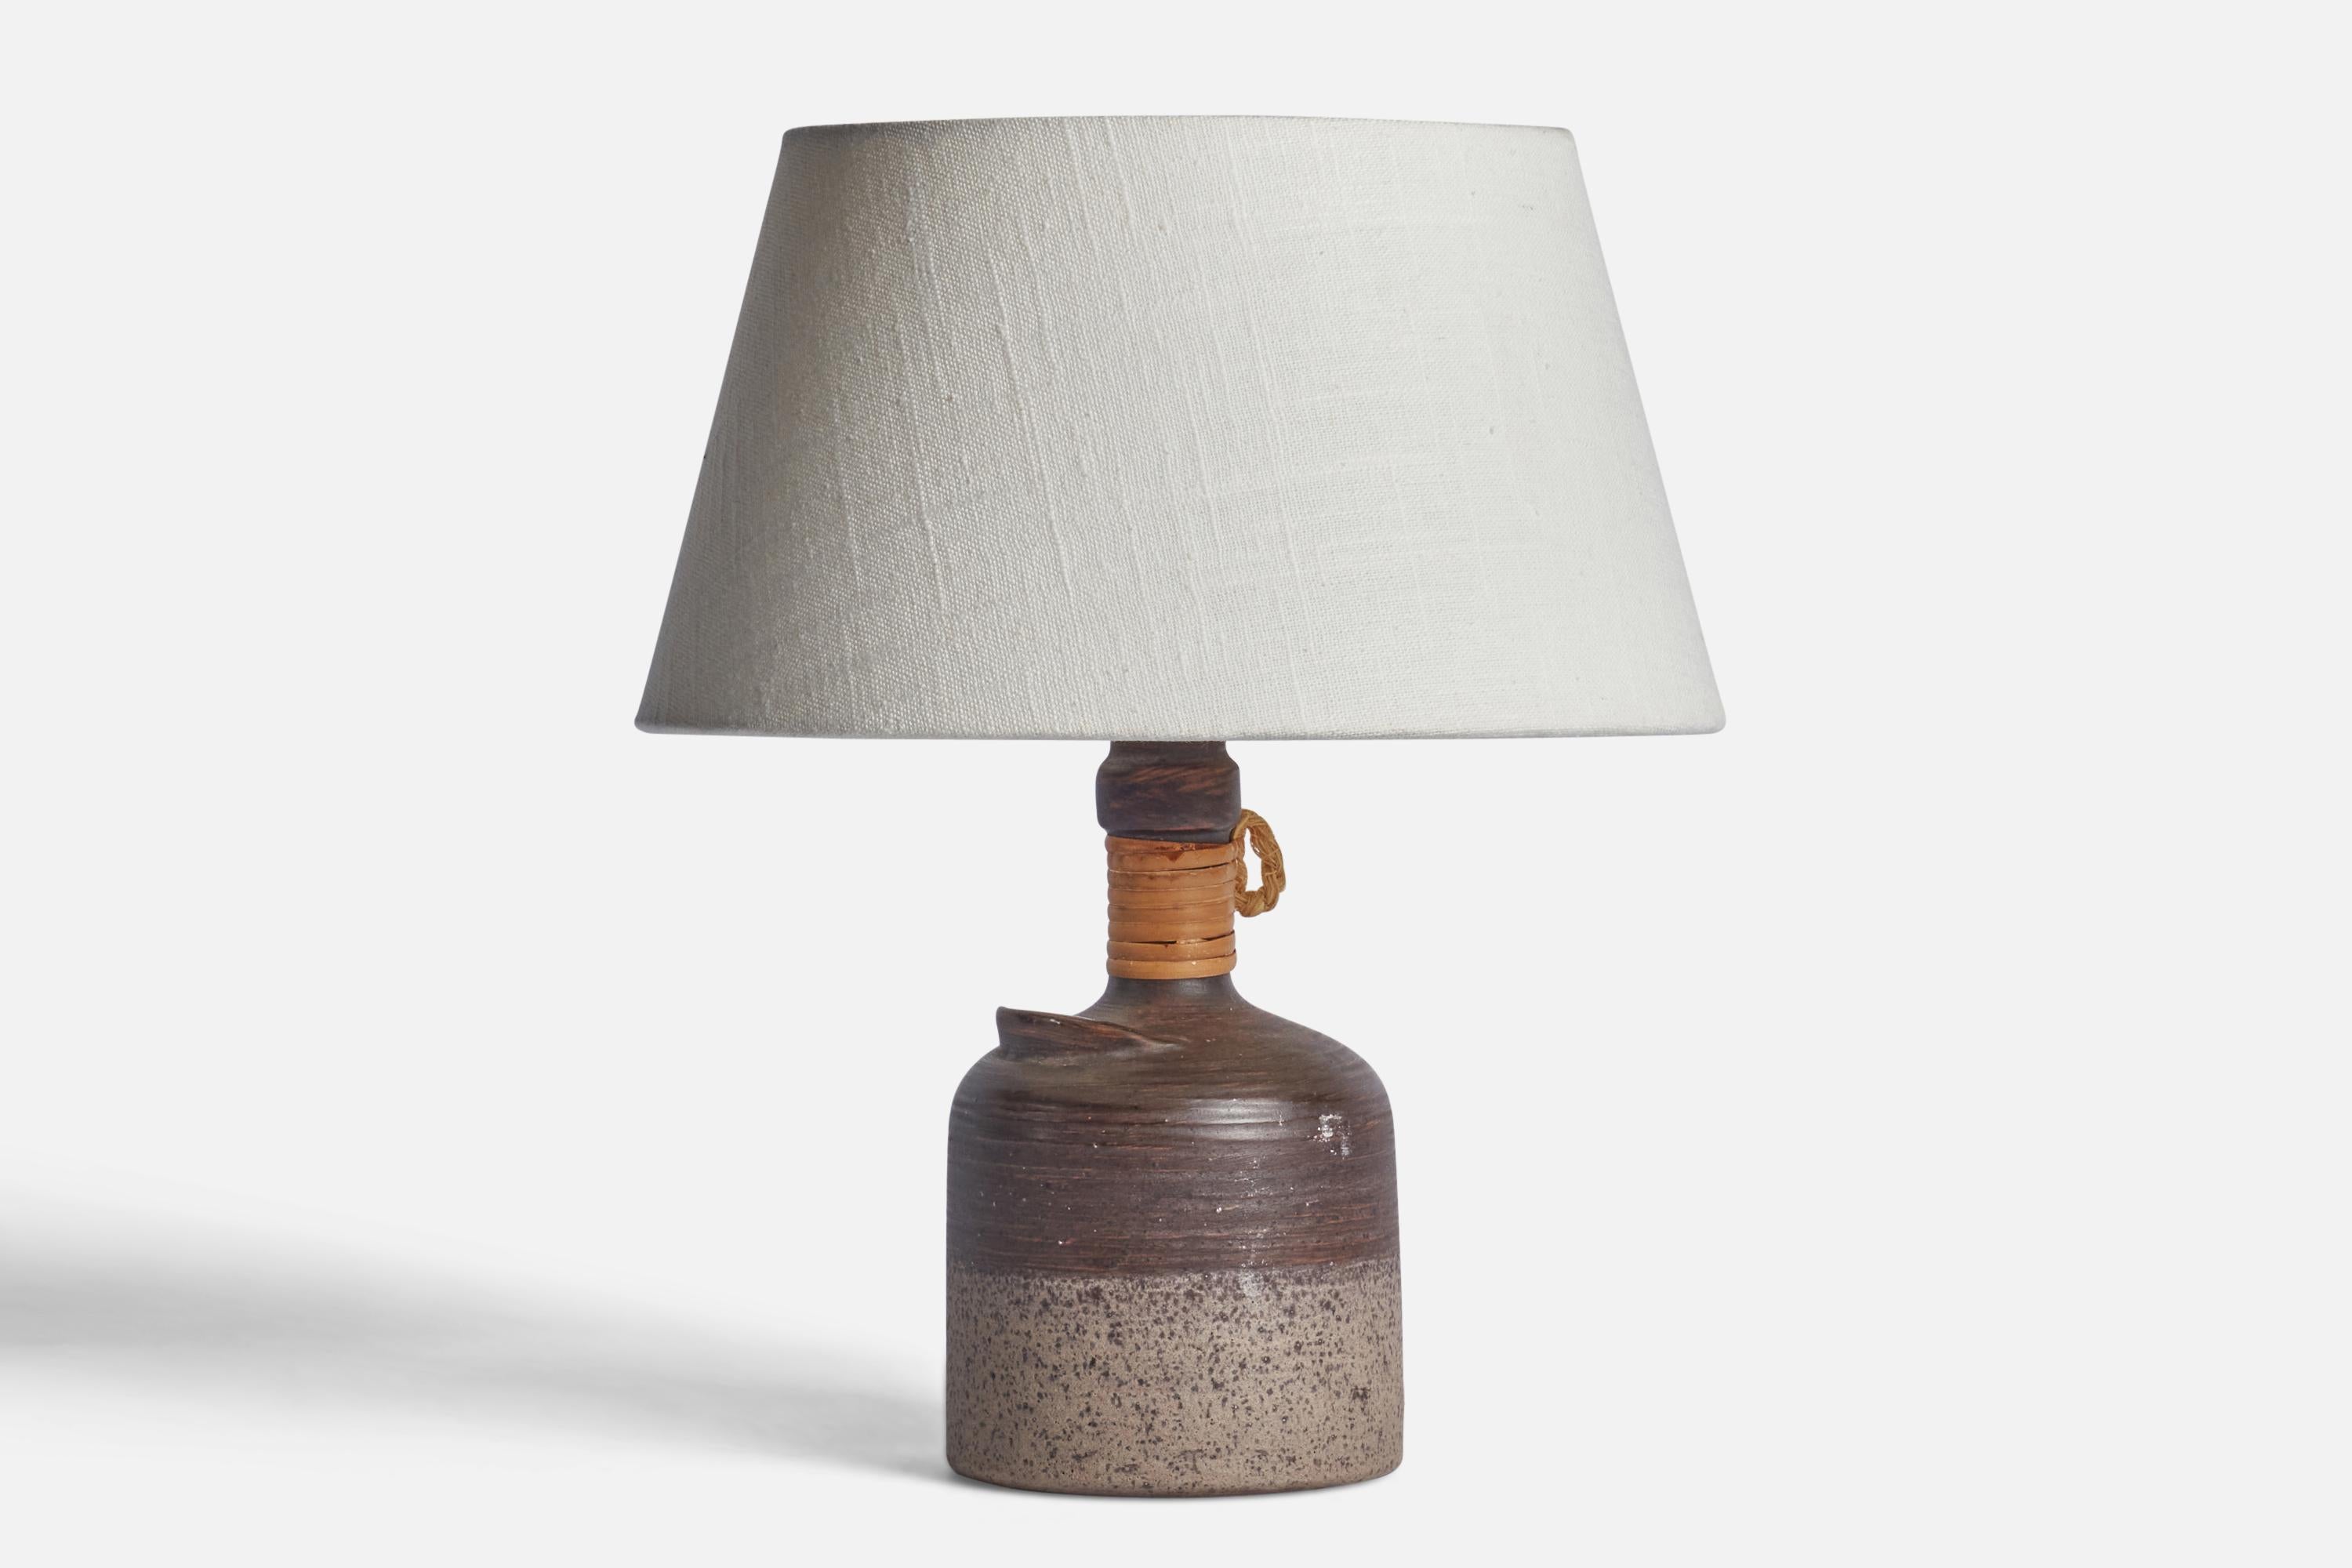 A grey-glazed incised ceramic, rattan and cord table lamp designed by Thomas Hellström and produced by Nittsjö, Sweden, c. 1970s.

Dimensions of Lamp (inches): 9” H x 4.25” Diameter
Dimensions of Shade (inches): 2.5” Top Diameter x 10” Bottom